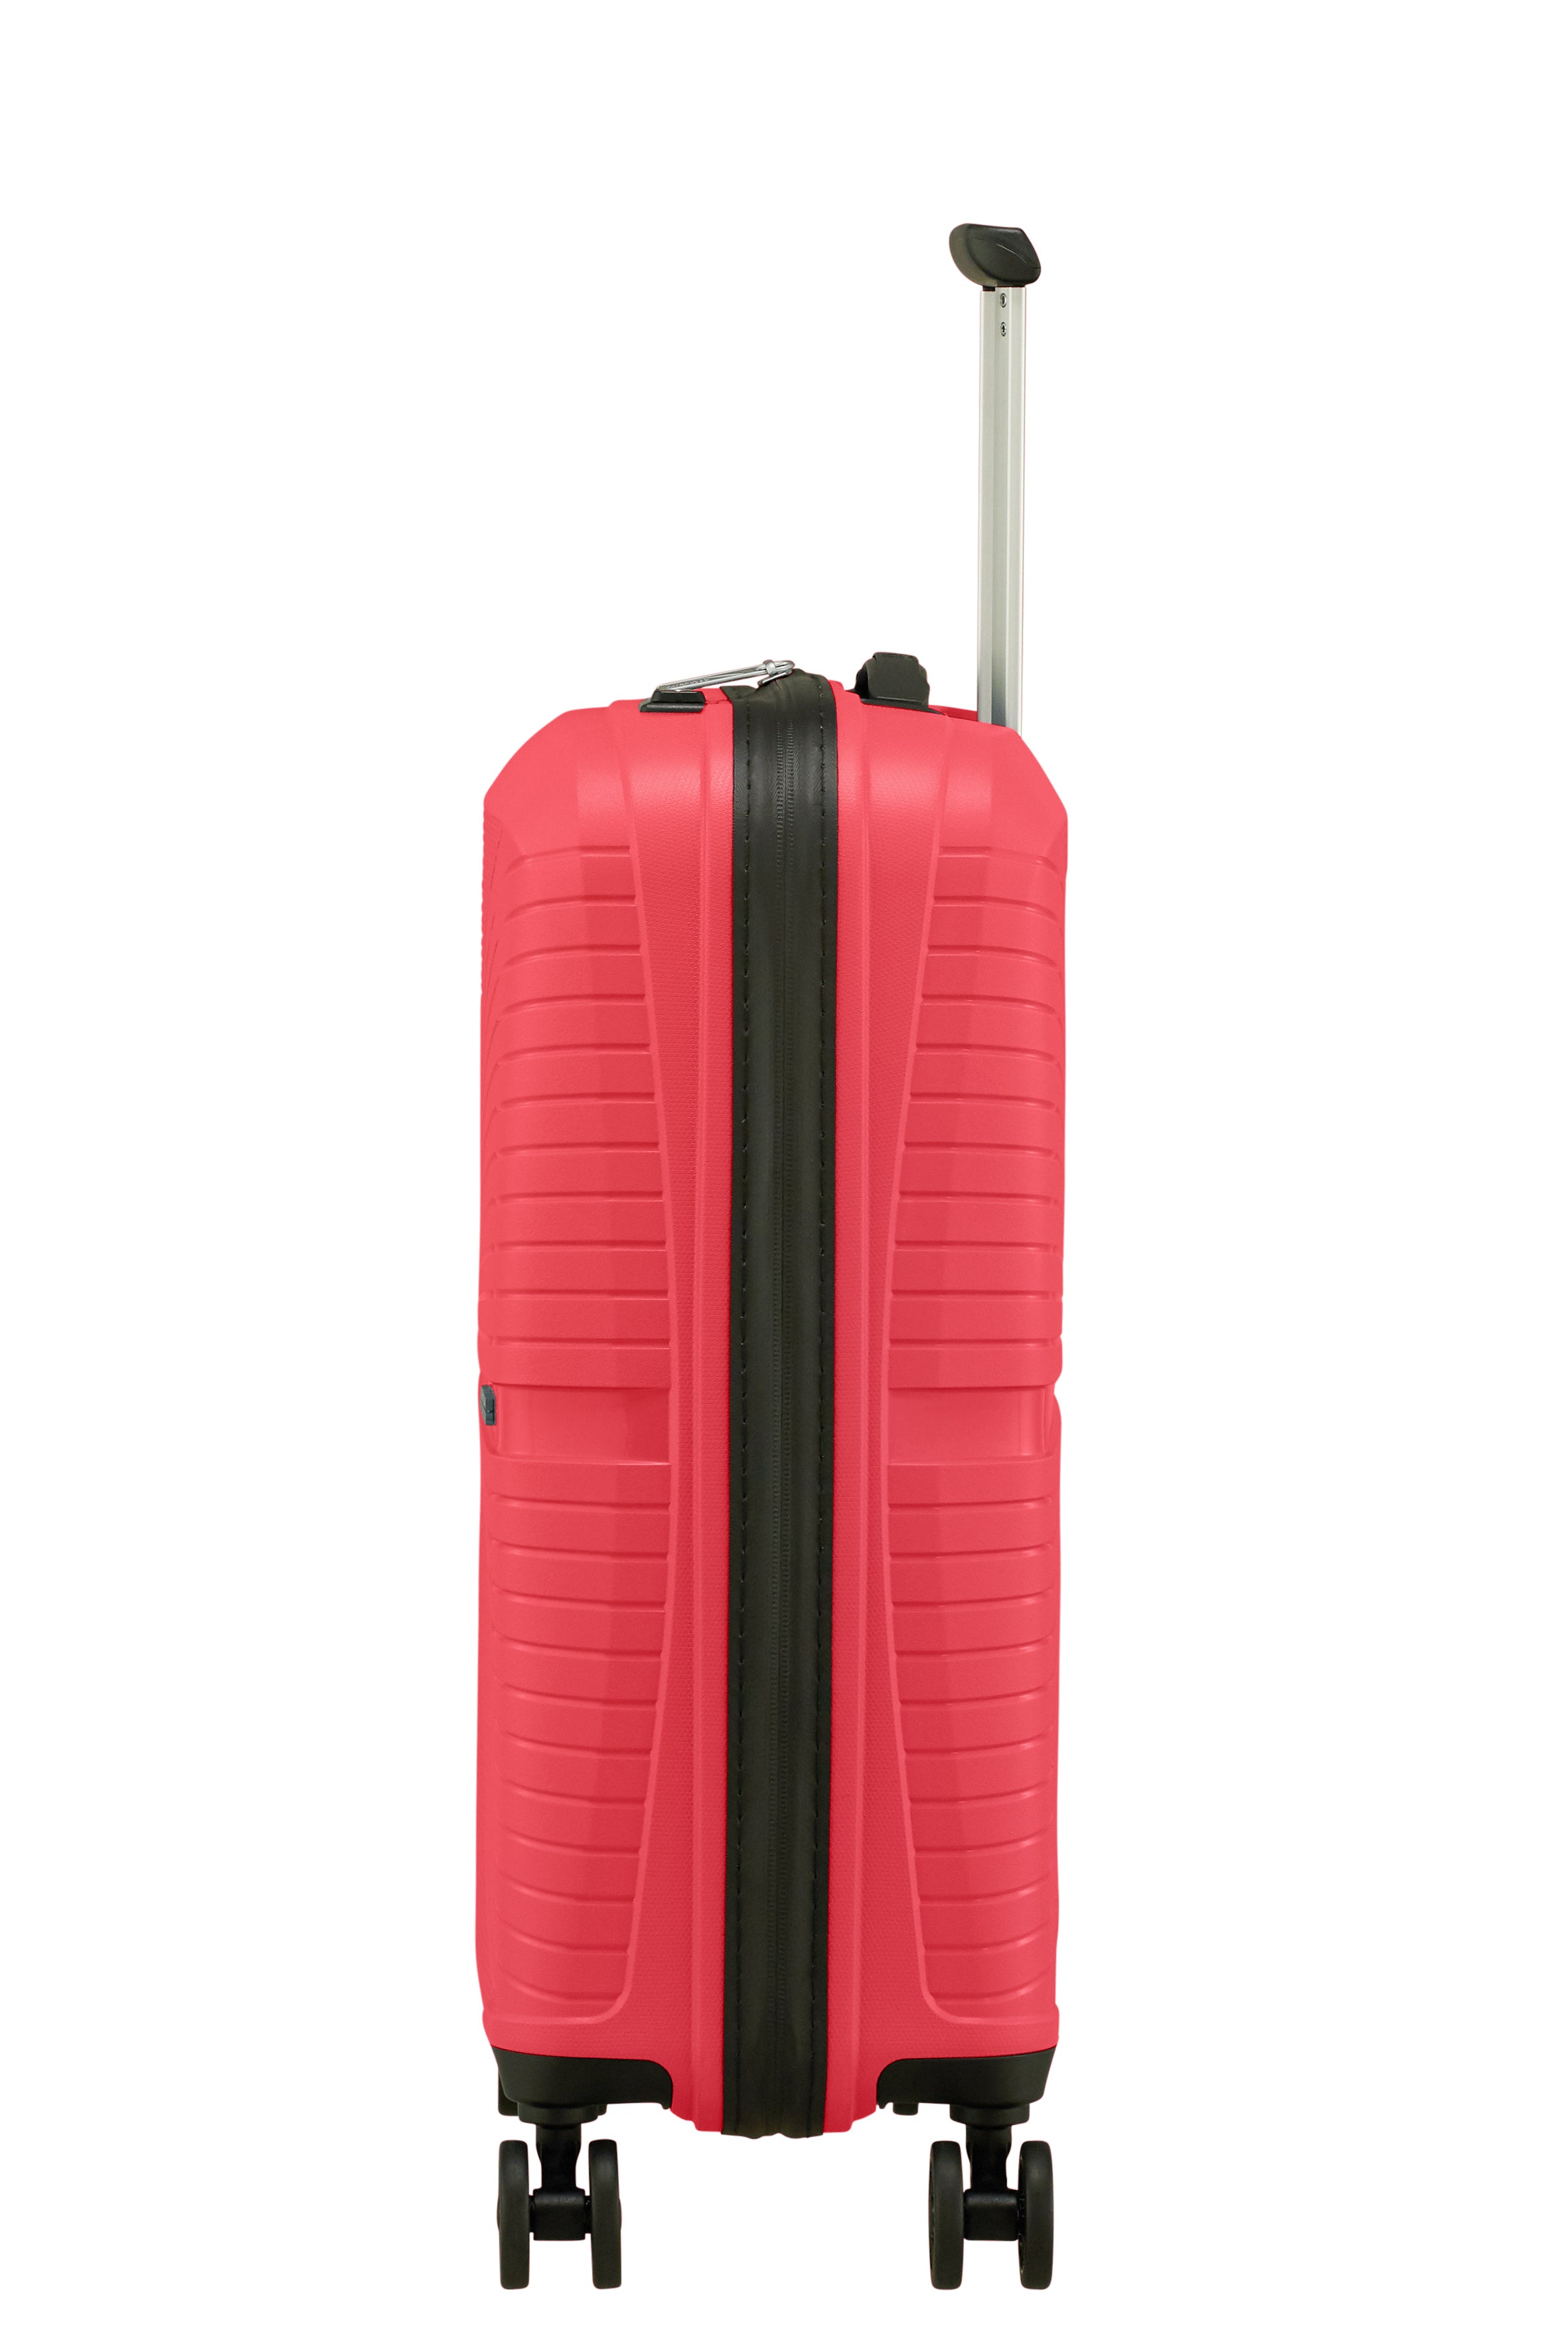 American Tourister - Airconic 55cm Small 4 Wheel Hard Suitcase - Paradise Pink-2